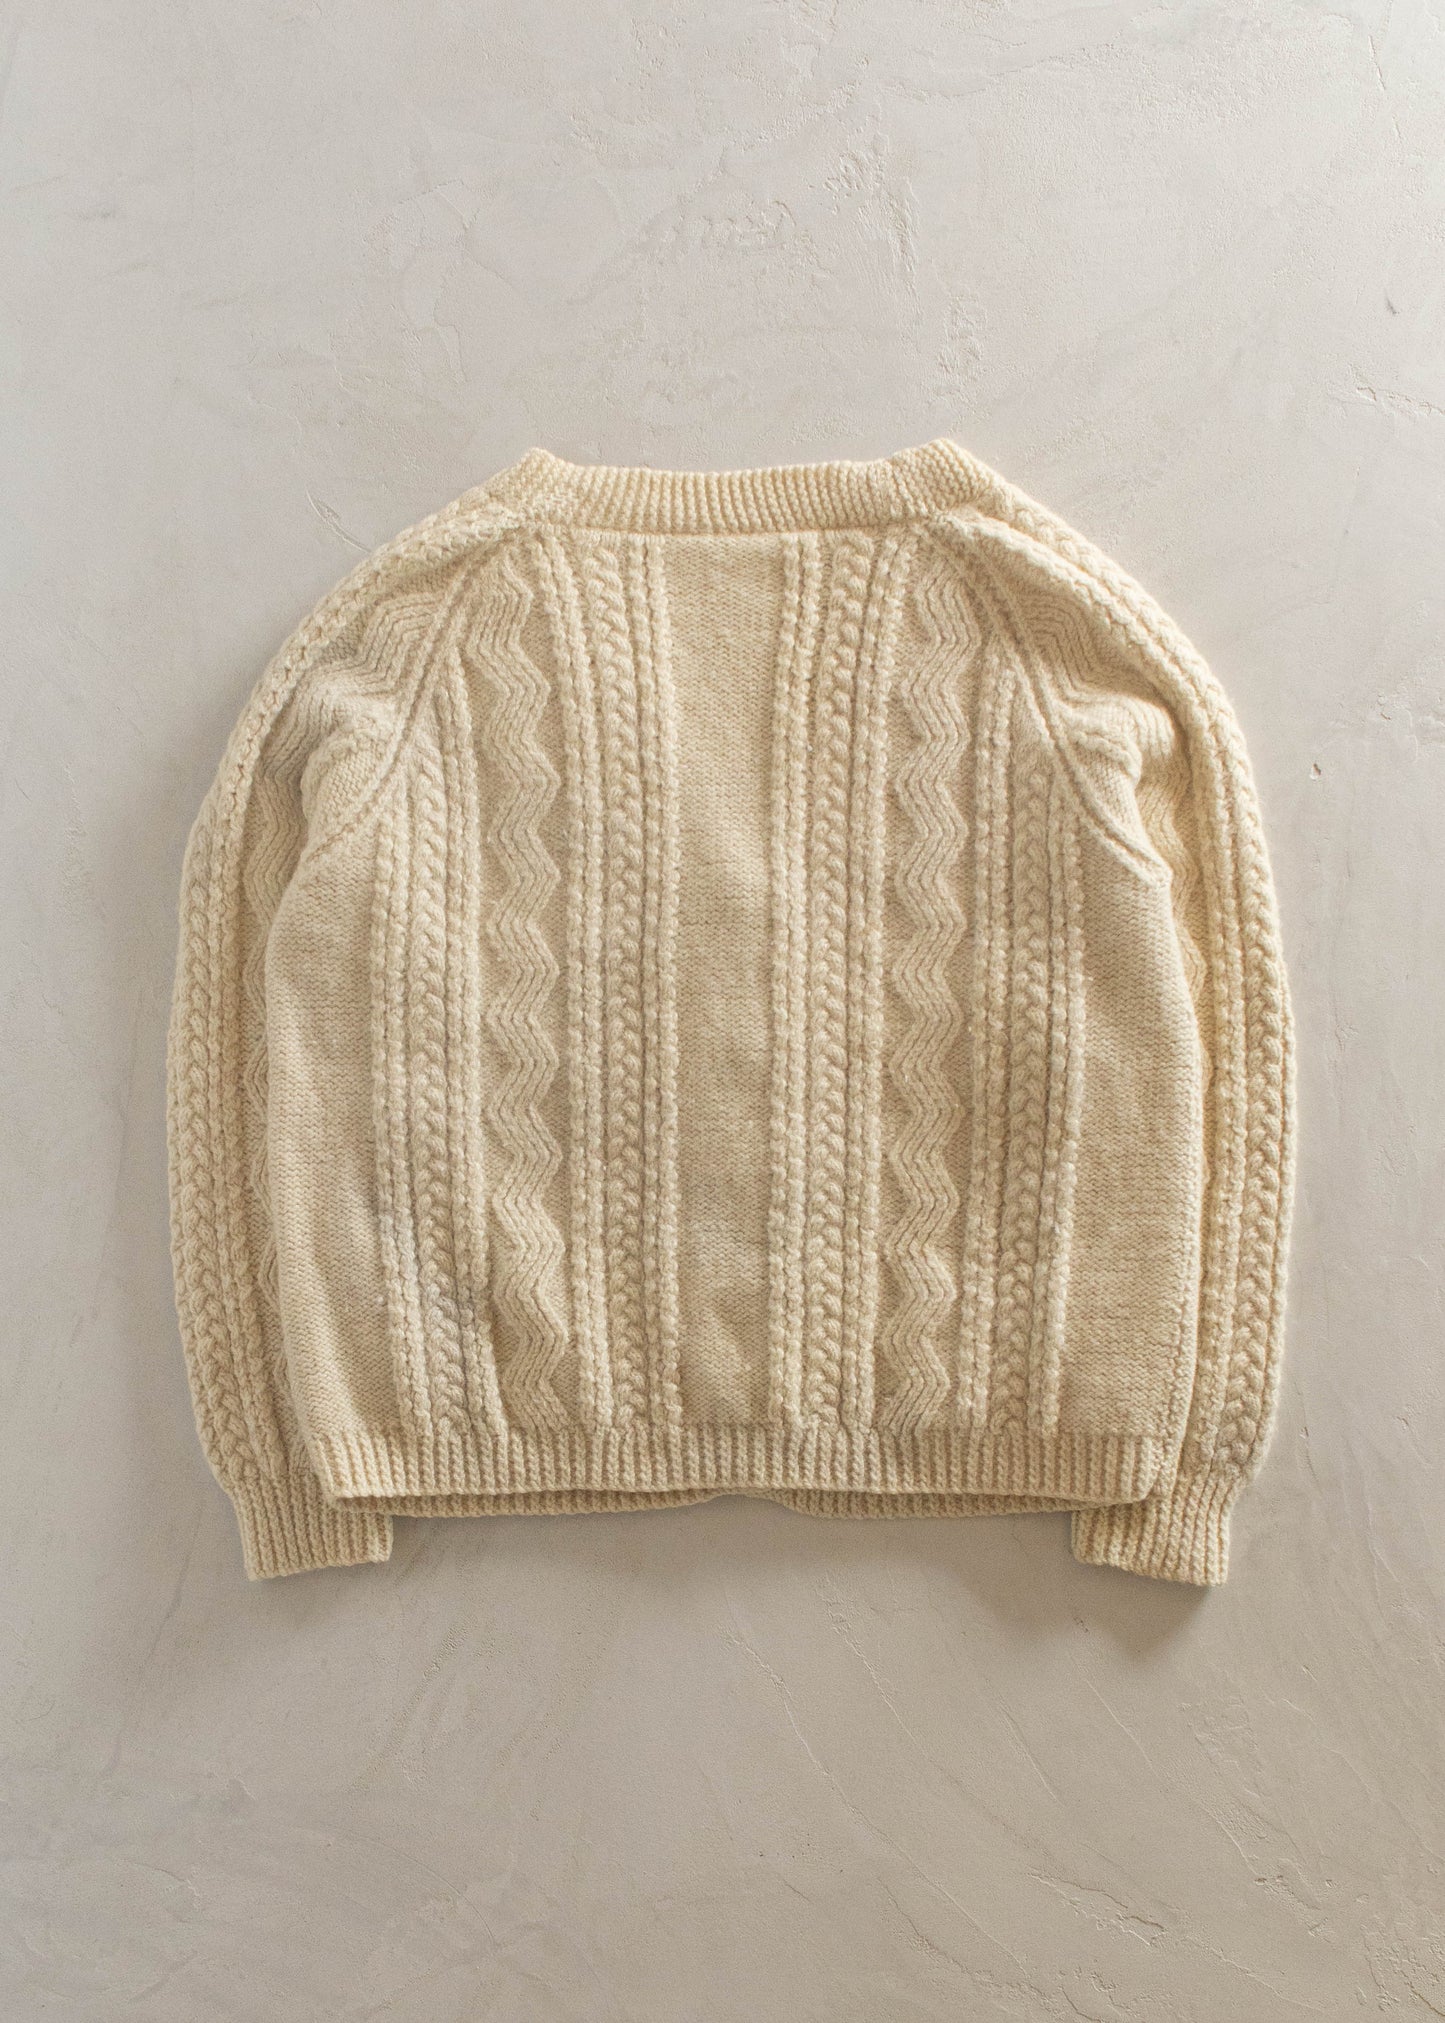 1980s Cable Knit Wool Fisherman Cardigan Size M/L